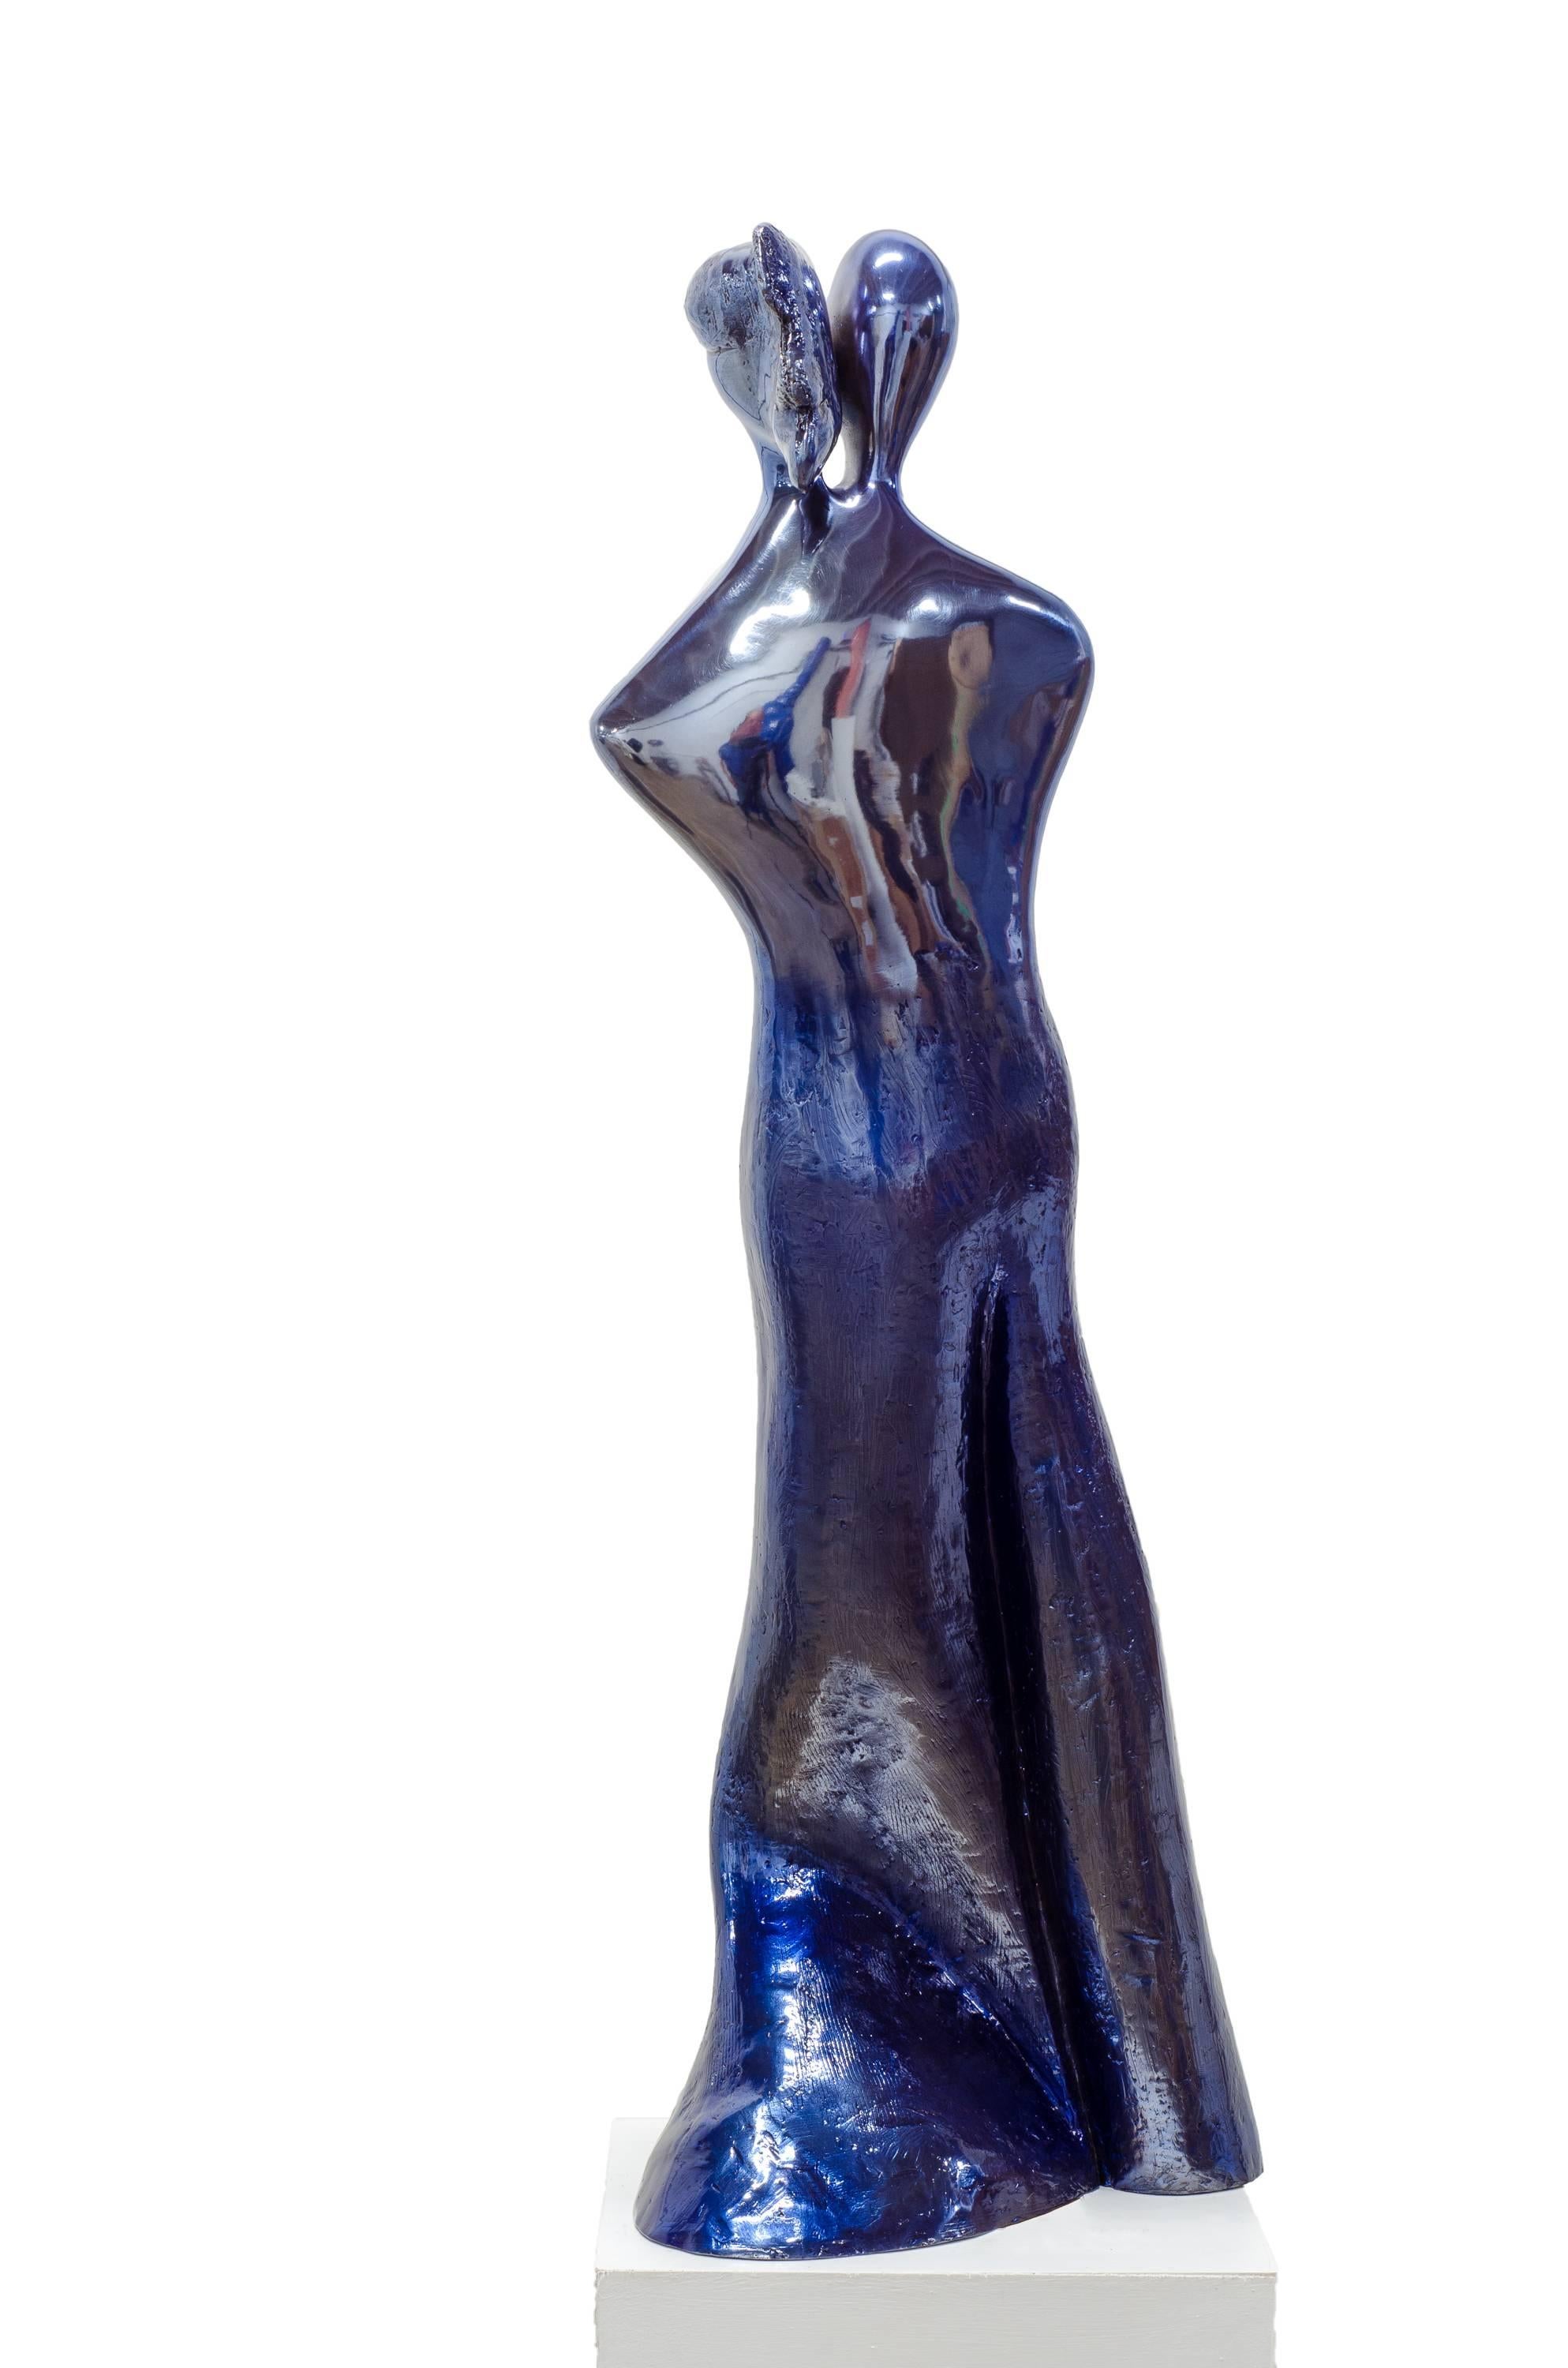 When In love, their souls and bodies fuse into just one. Soul Mates #1 (in blue) is a contemporary bronze sculpture by Beatriz Gerenstein where the artist plays with the deep mysteries of love. This artwork shows two human figures standing up and